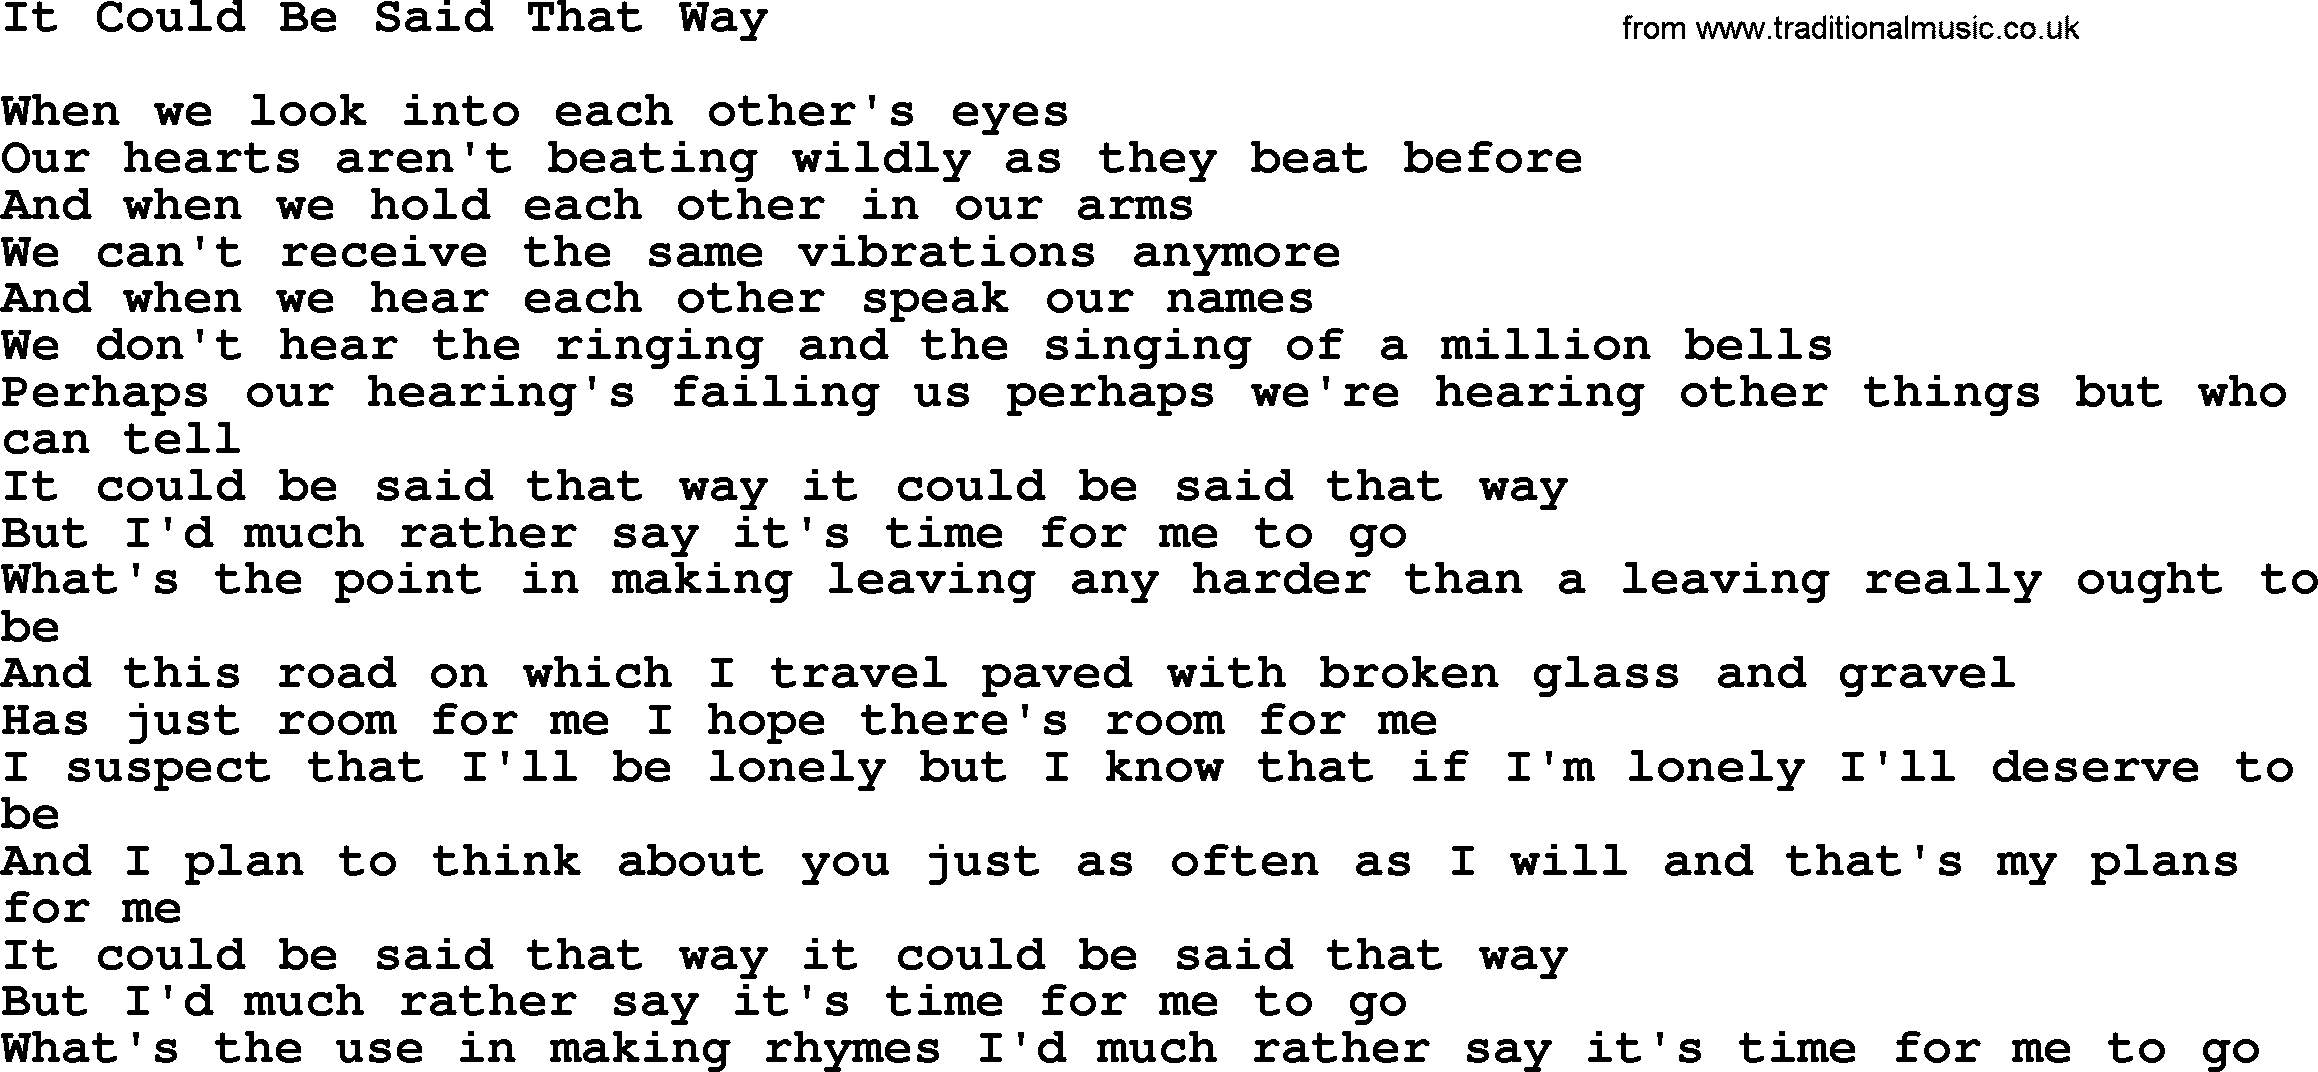 Willie Nelson song: It Could Be Said That Way lyrics